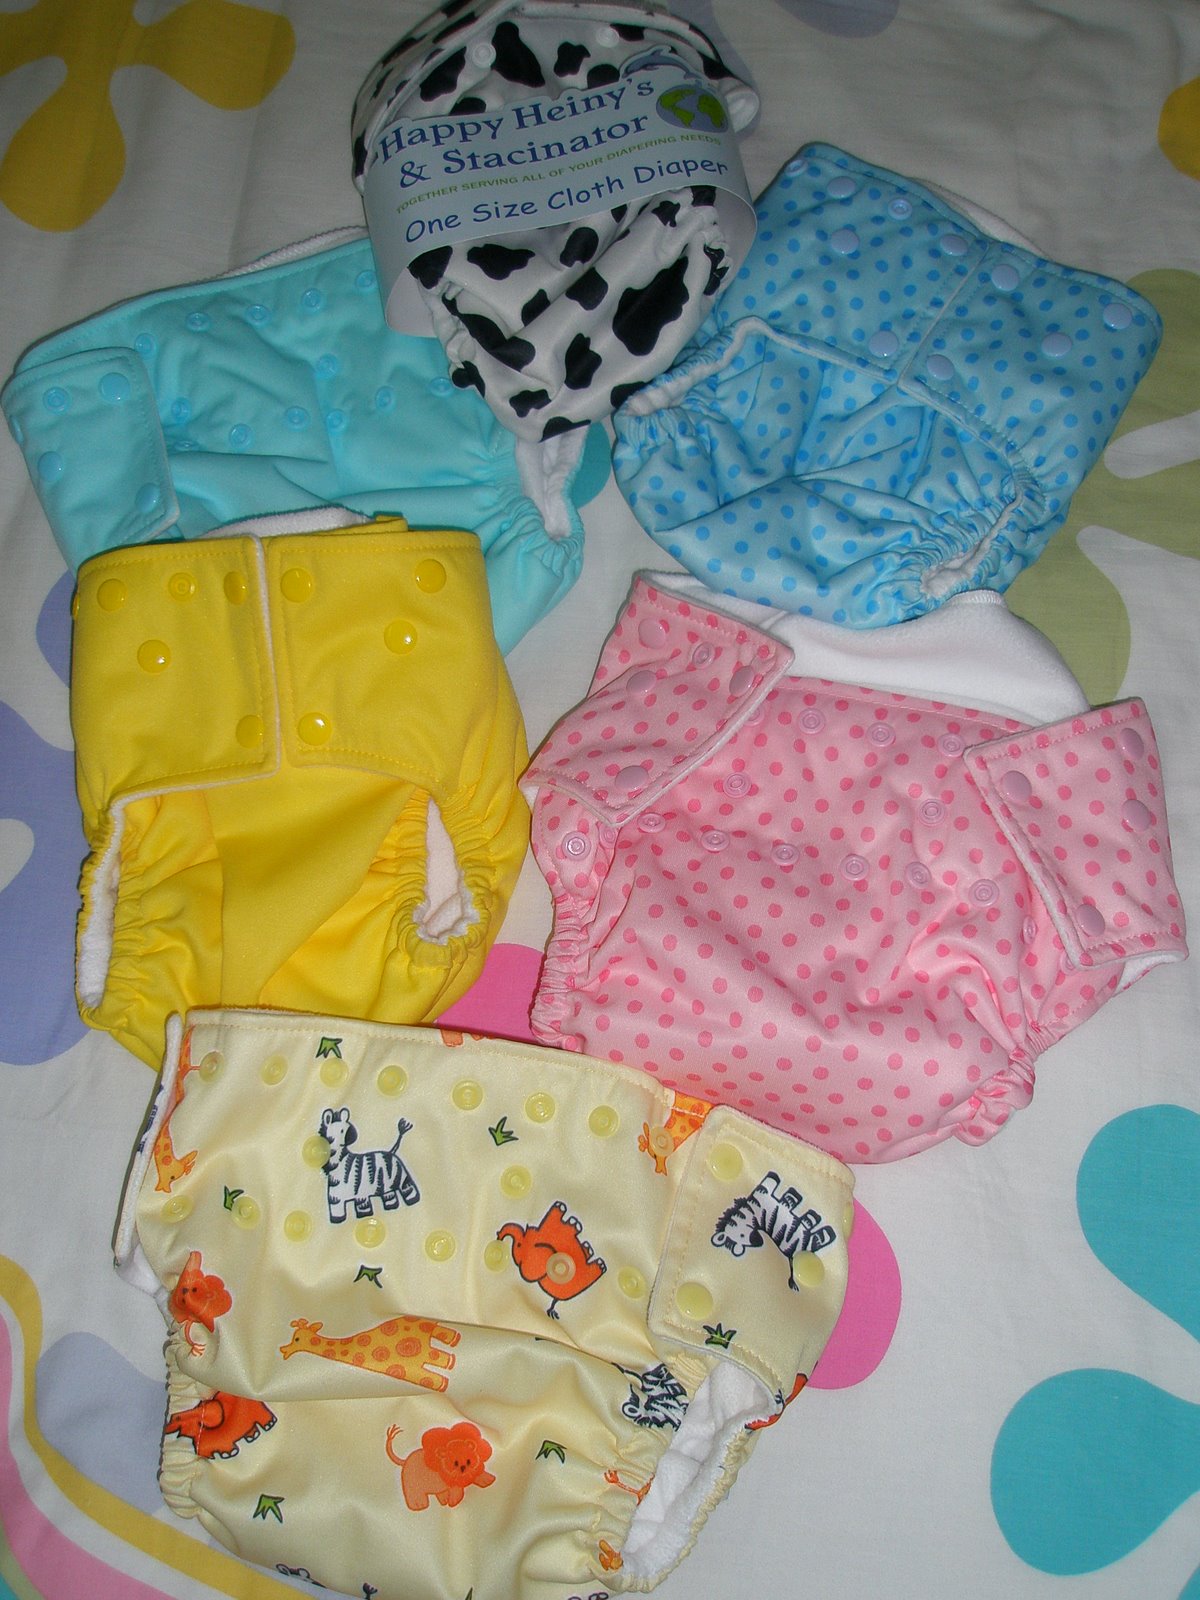 [New+cloth+diapers,+Sher+eating+chick+feet+023.jpg]